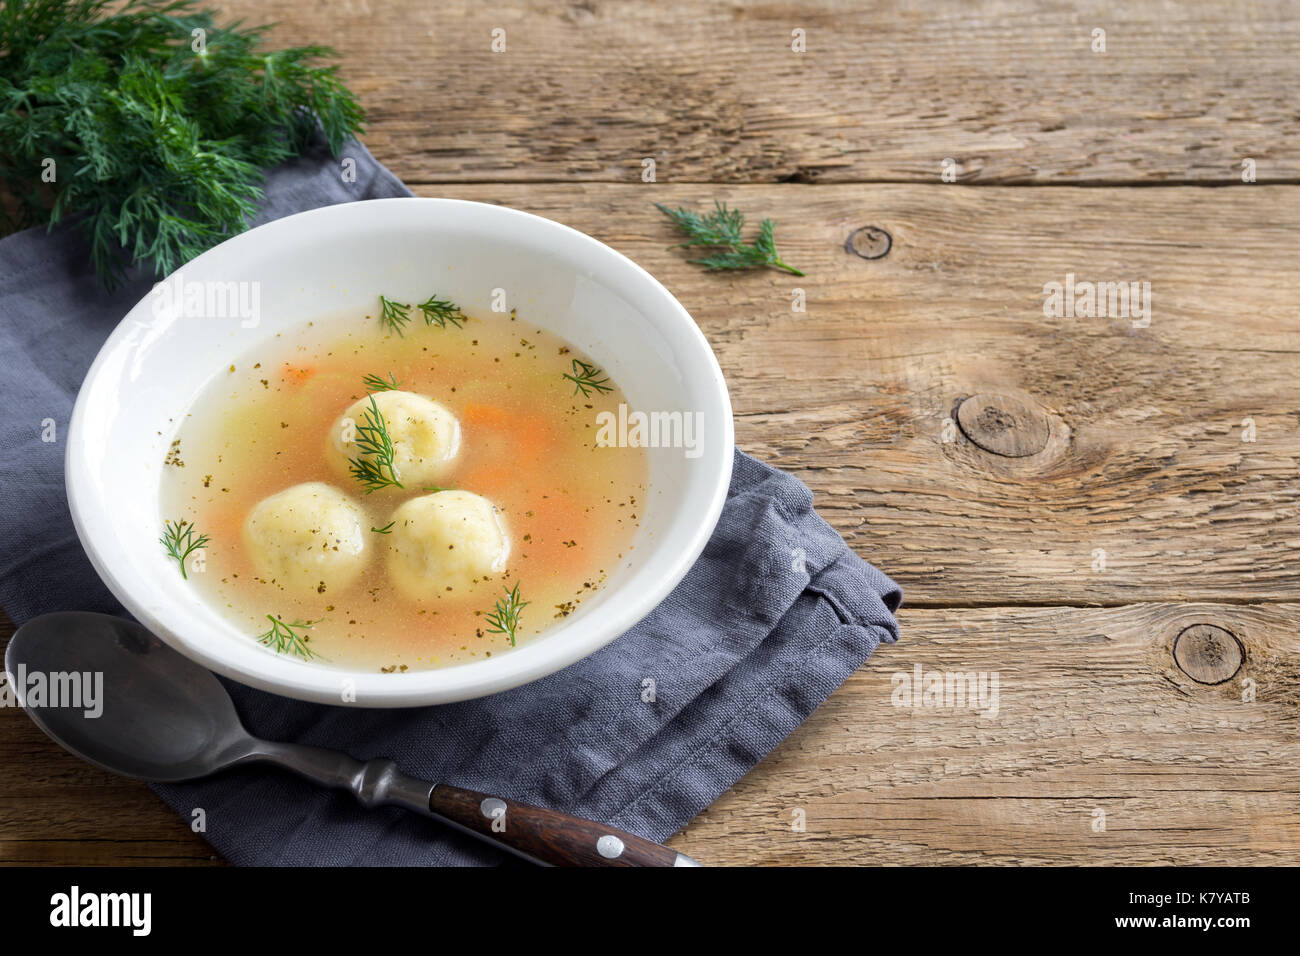 Matzoh ball soup. Jewish traditional cuisine, homemade Matzo Ball soup with vegetables. Stock Photo